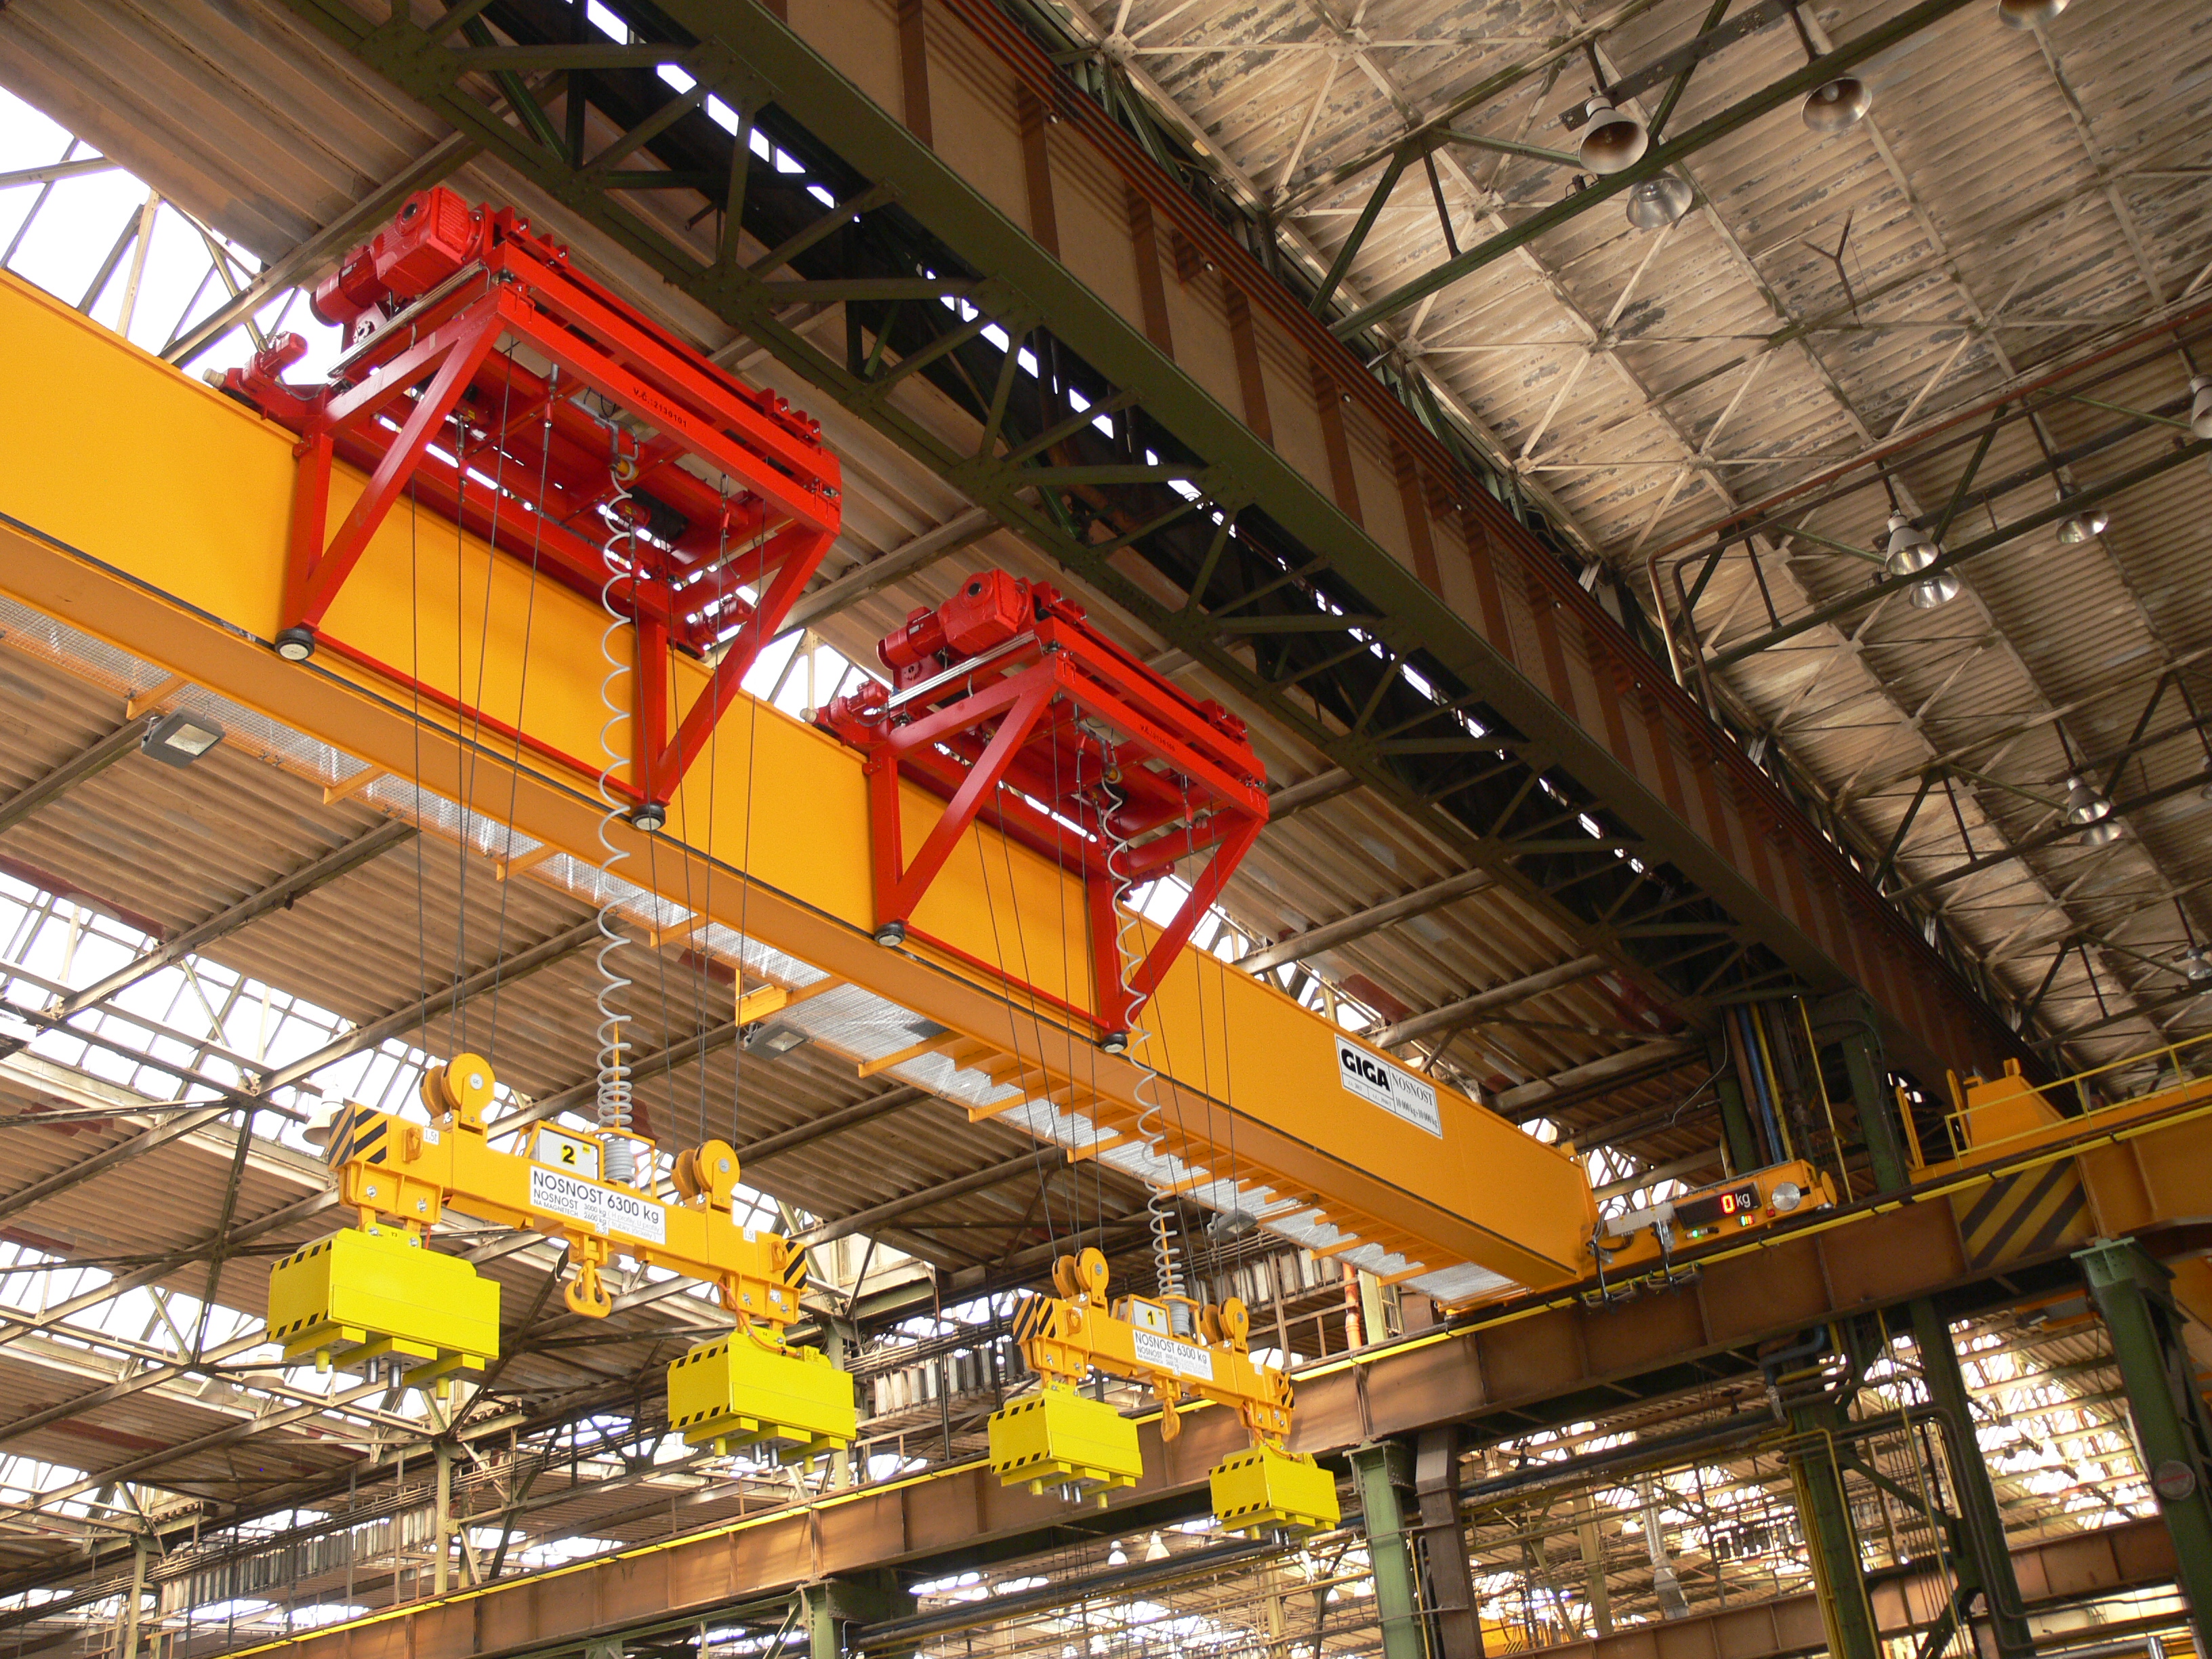 Delivery of special bridge cranes with cantilever hoists for the NYPRO metallurgical storehouse